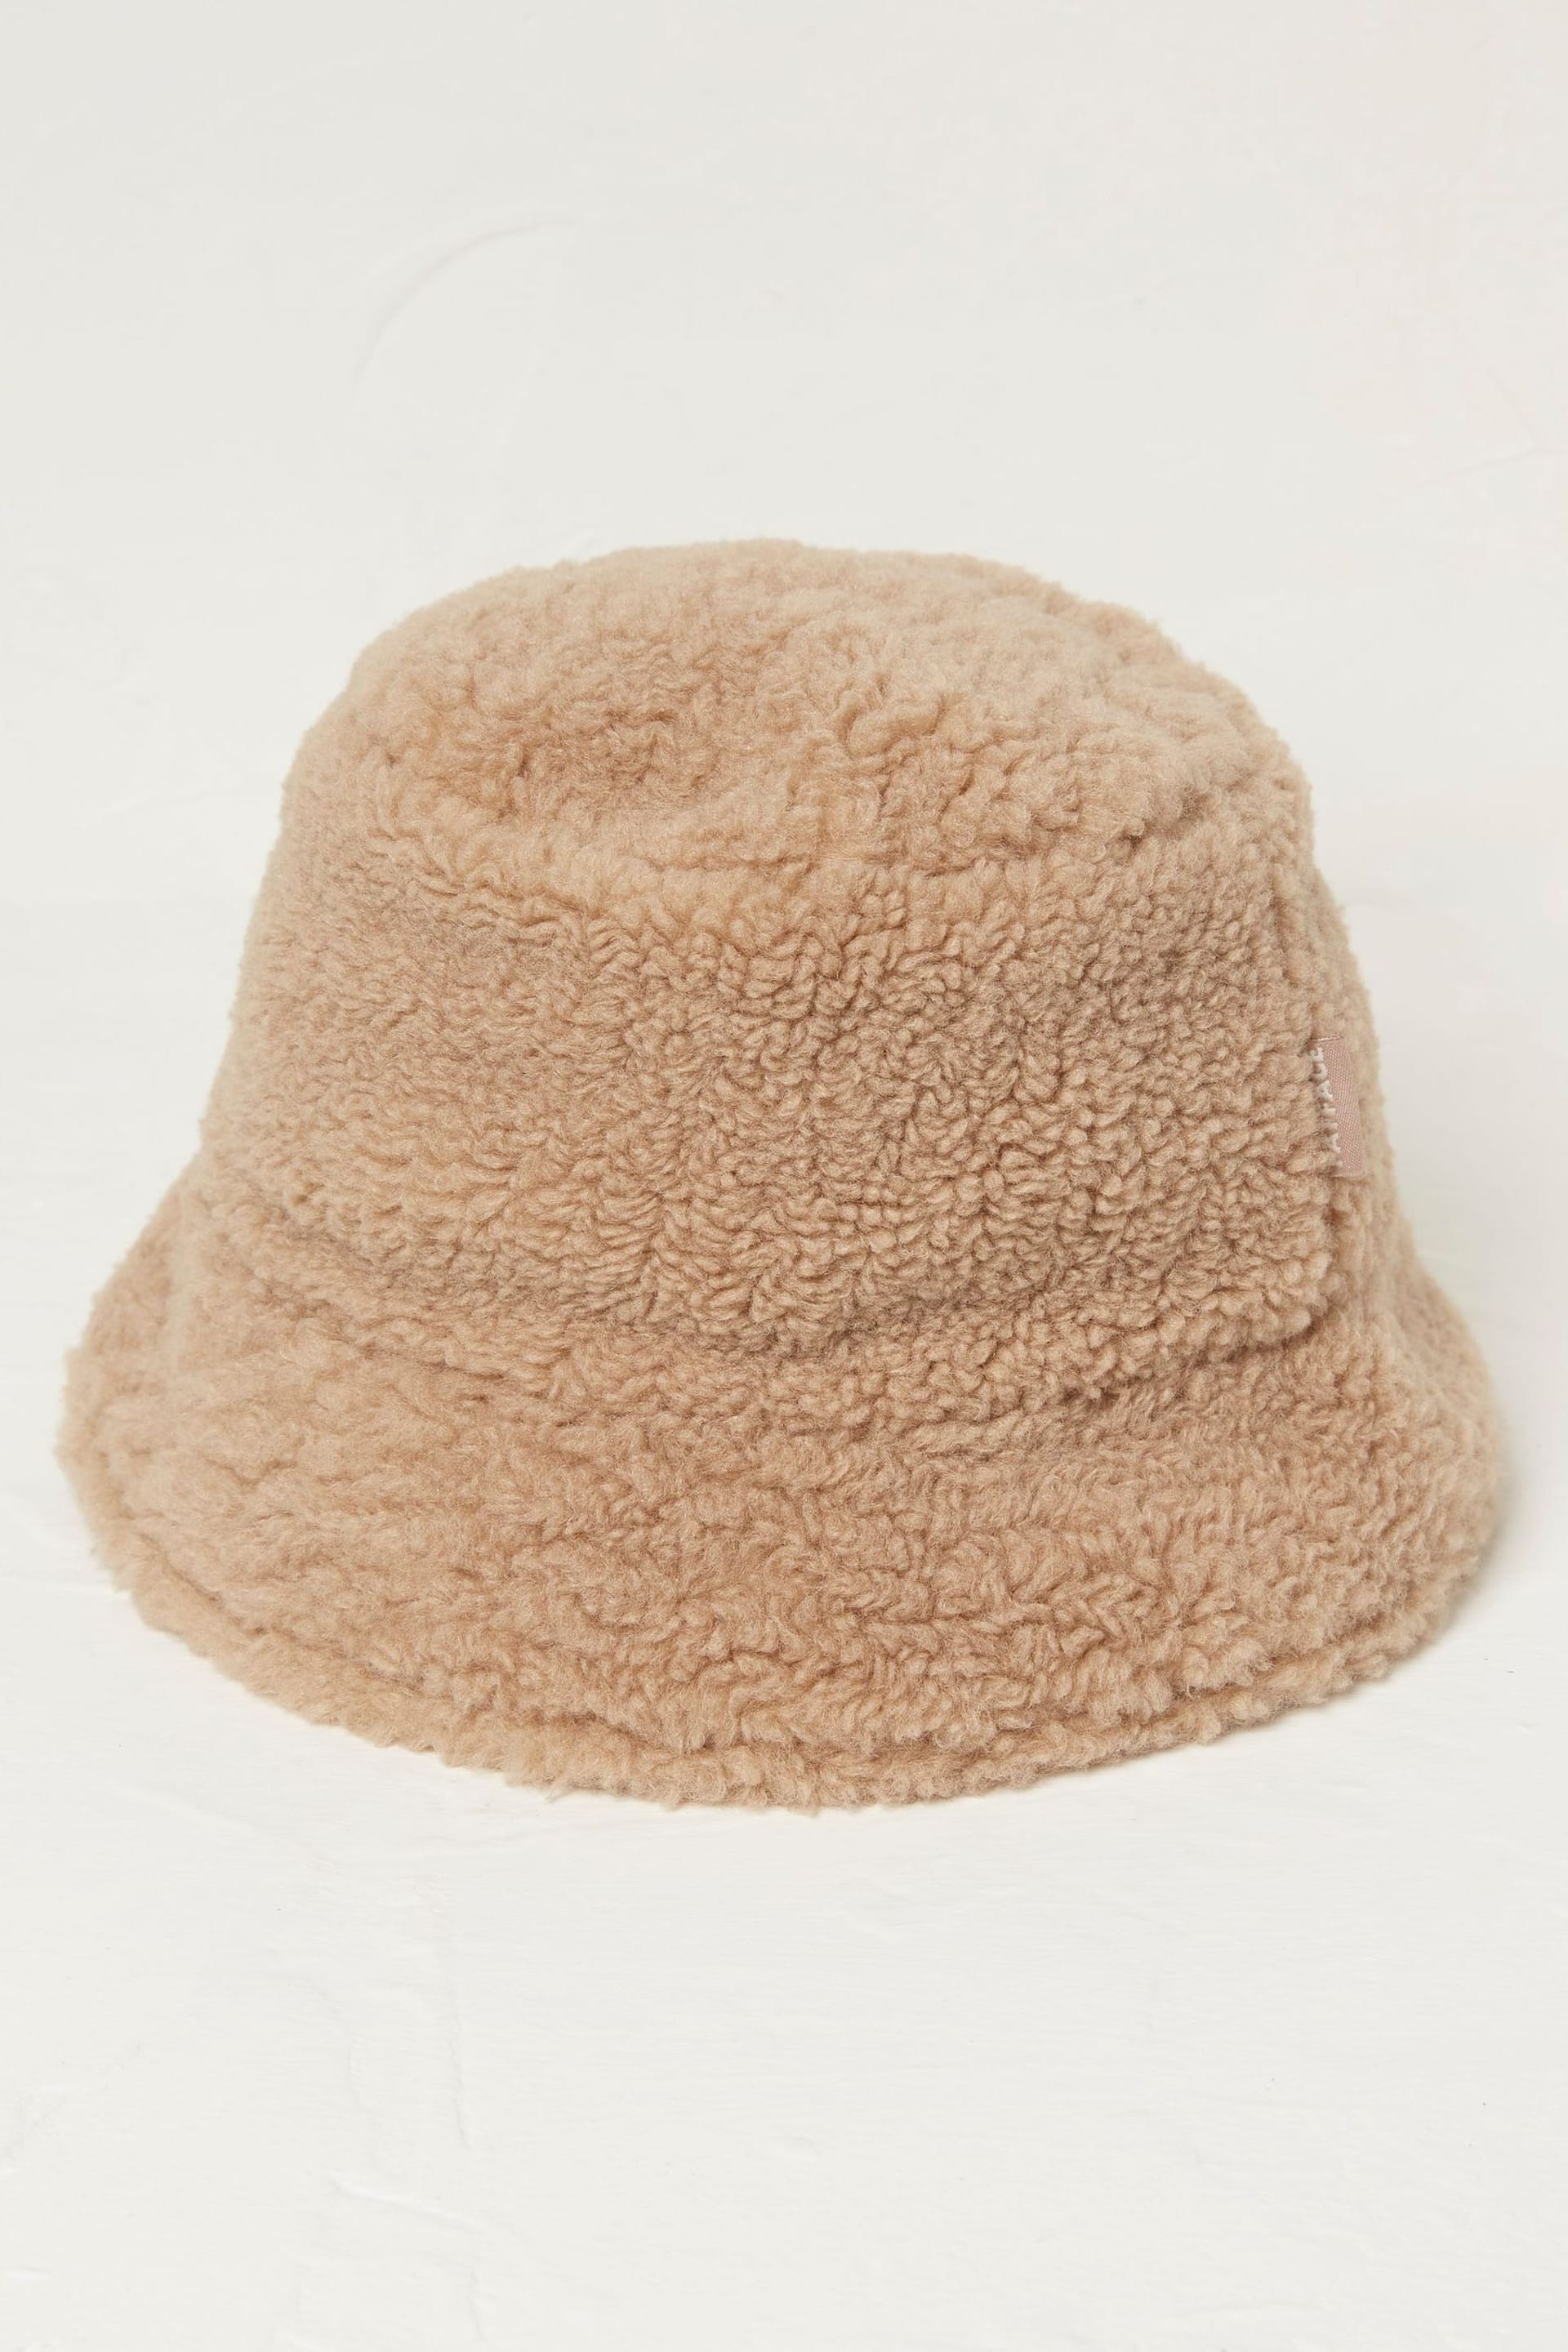 FatFace Brown Borg Bucket Hat - Image 1 of 3